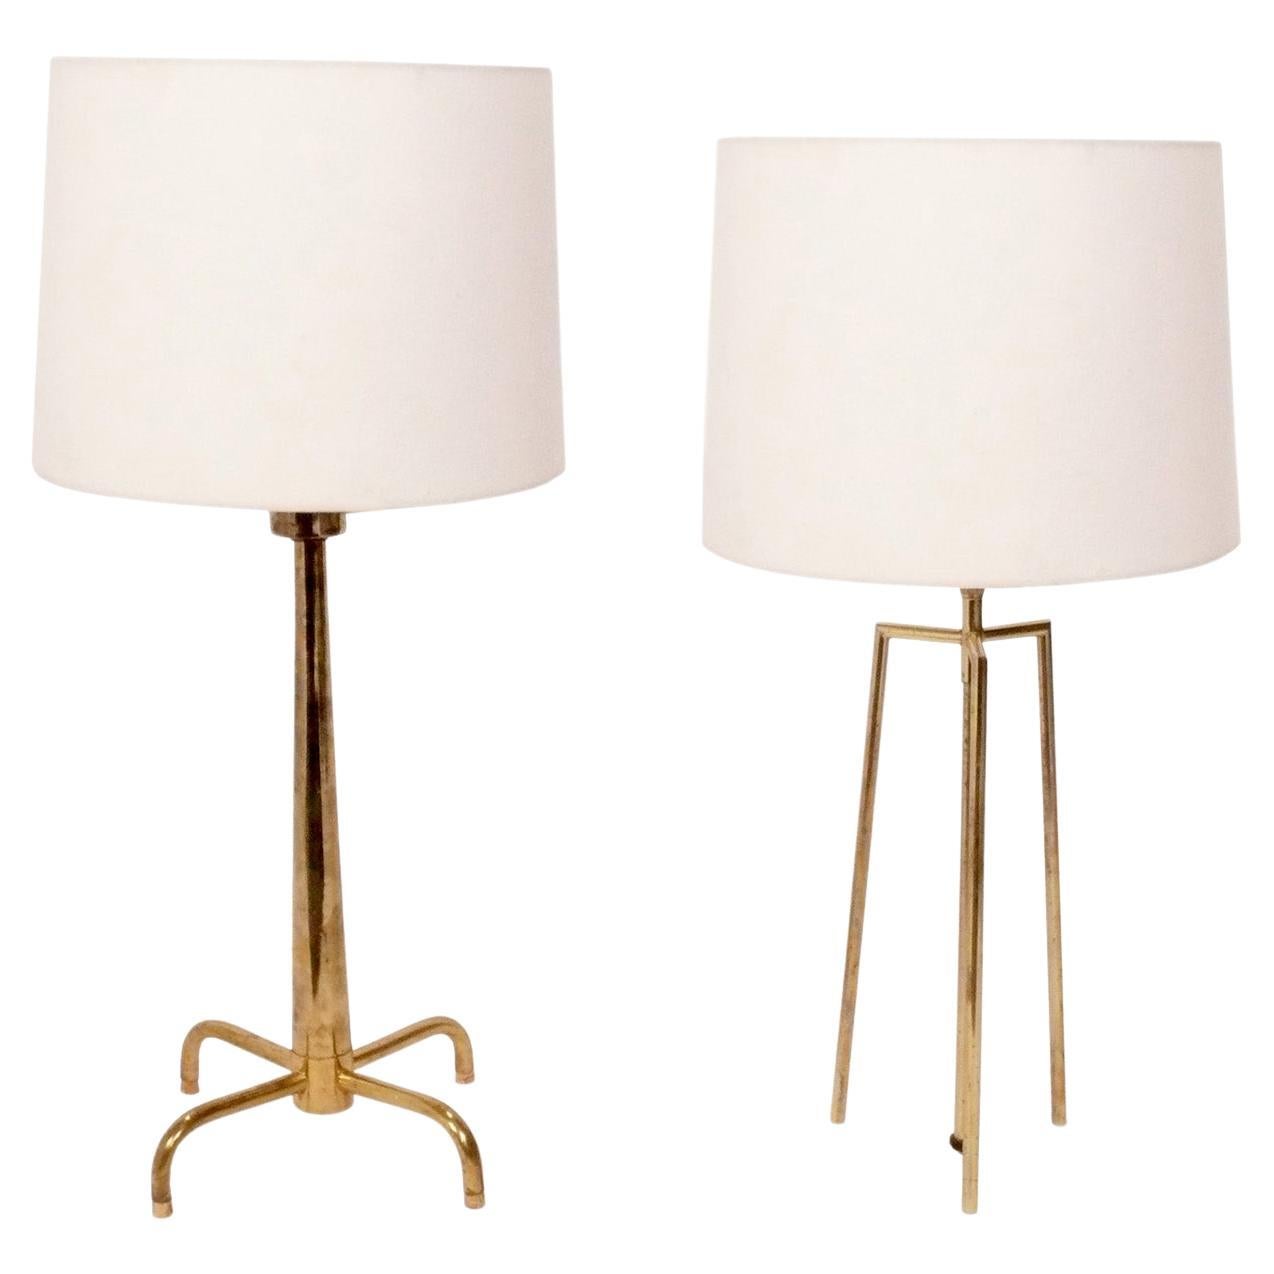 Selection of Mid-Century Modern Brass Table Lamps